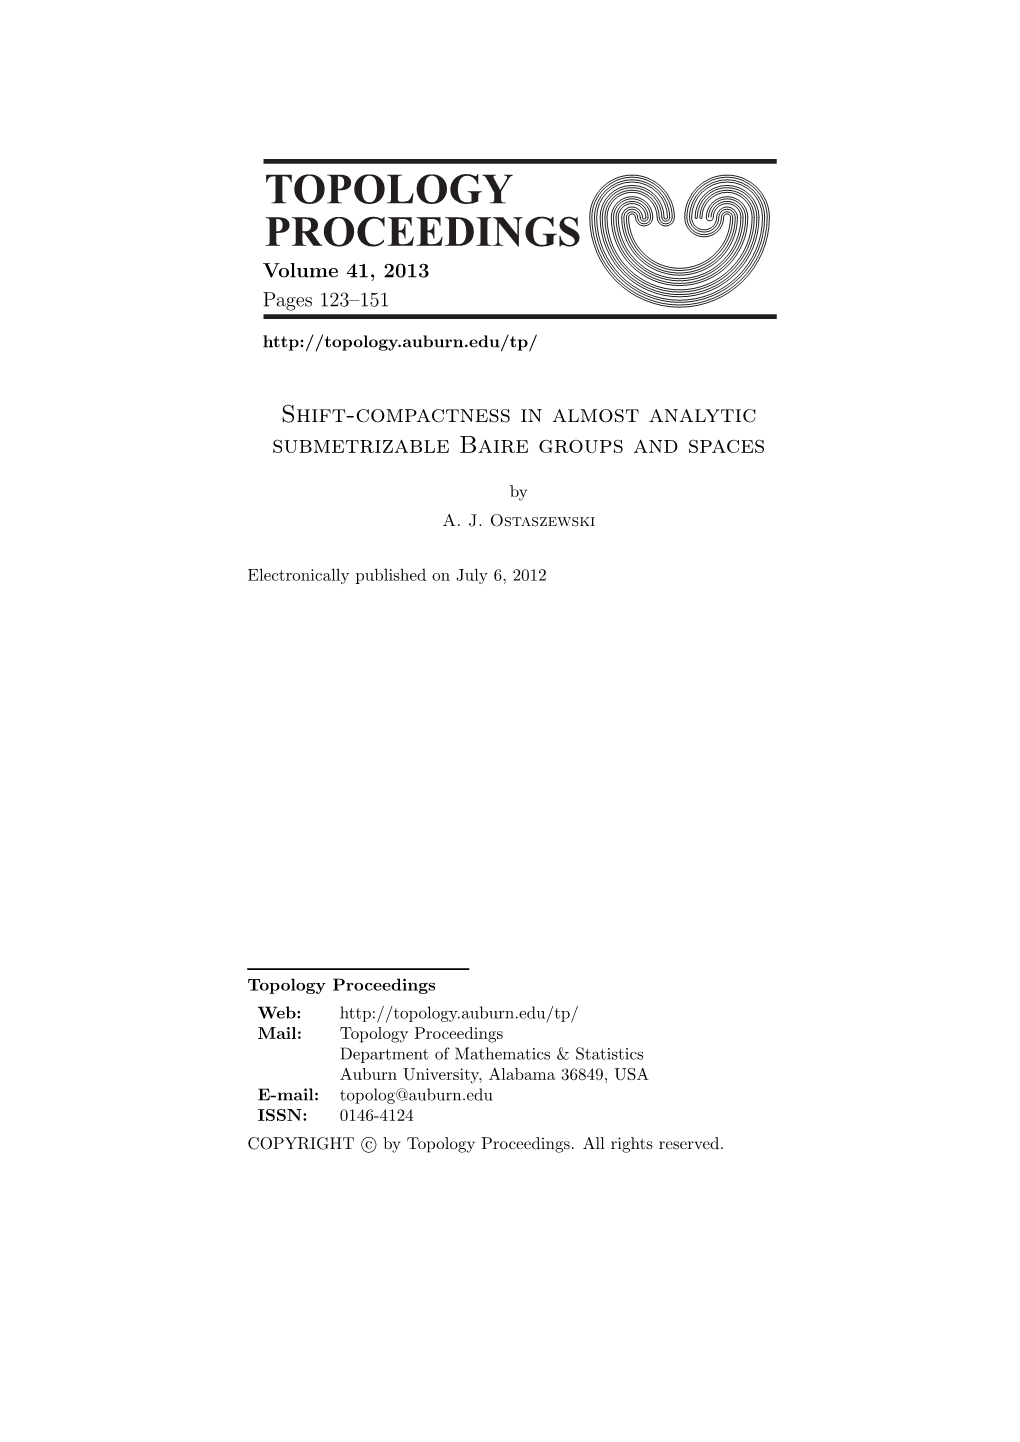 Topology Proceedings 41 (2013) Pp. 123-151: Shift-Compactness In